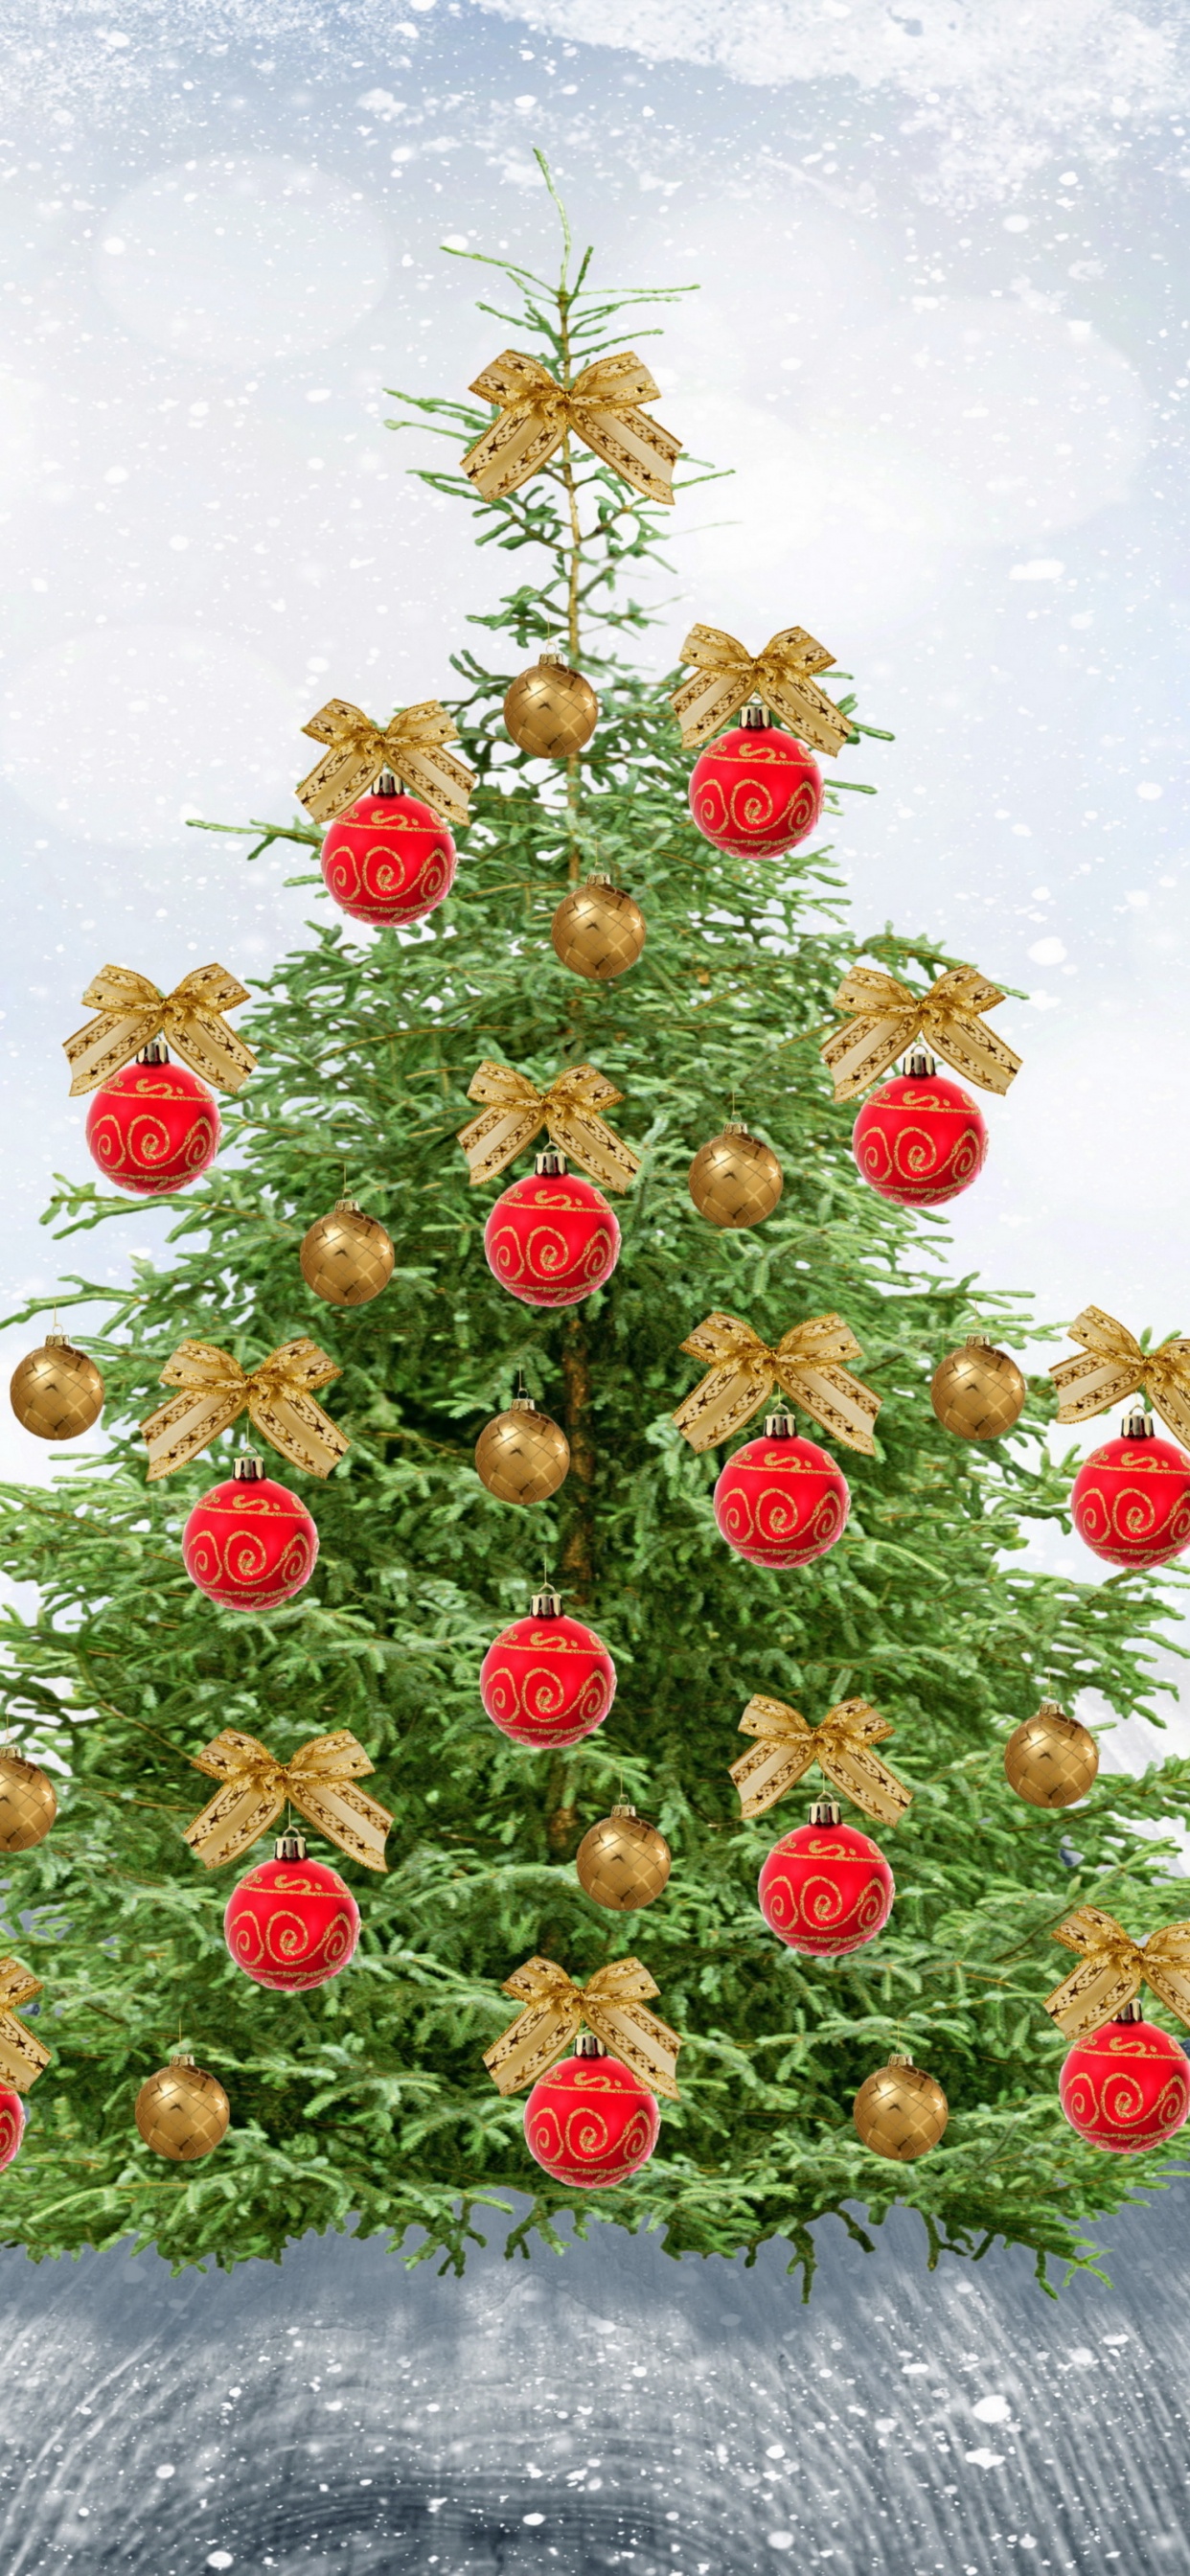 New Year, Christmas Day, Santa Claus, Christmas Tree, Christmas Decoration. Wallpaper in 1242x2688 Resolution